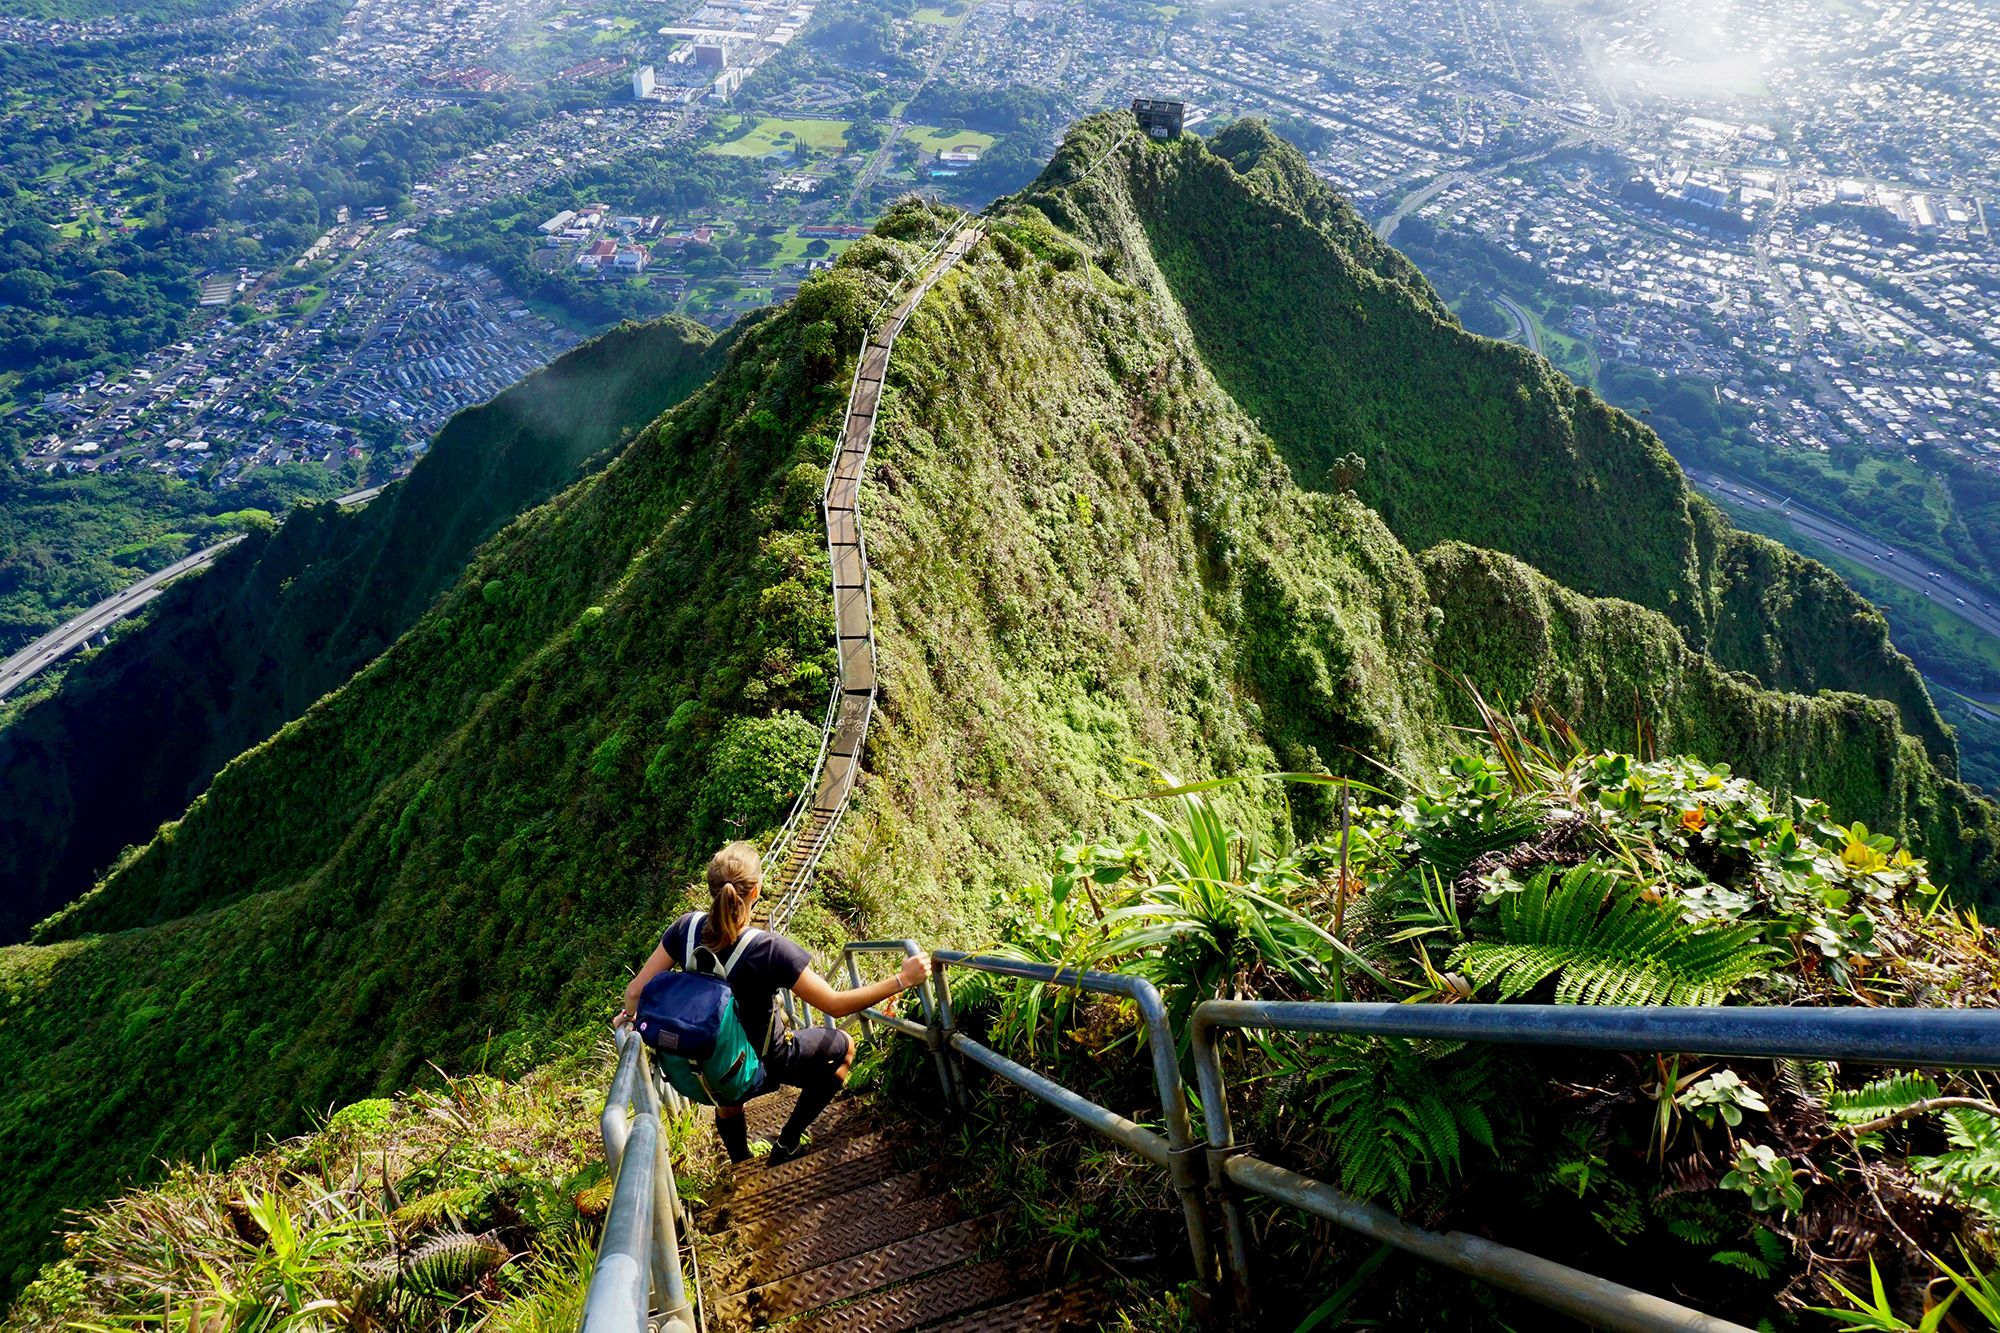 Hawaii's famed 'Stairway to Heaven' to be dismantled